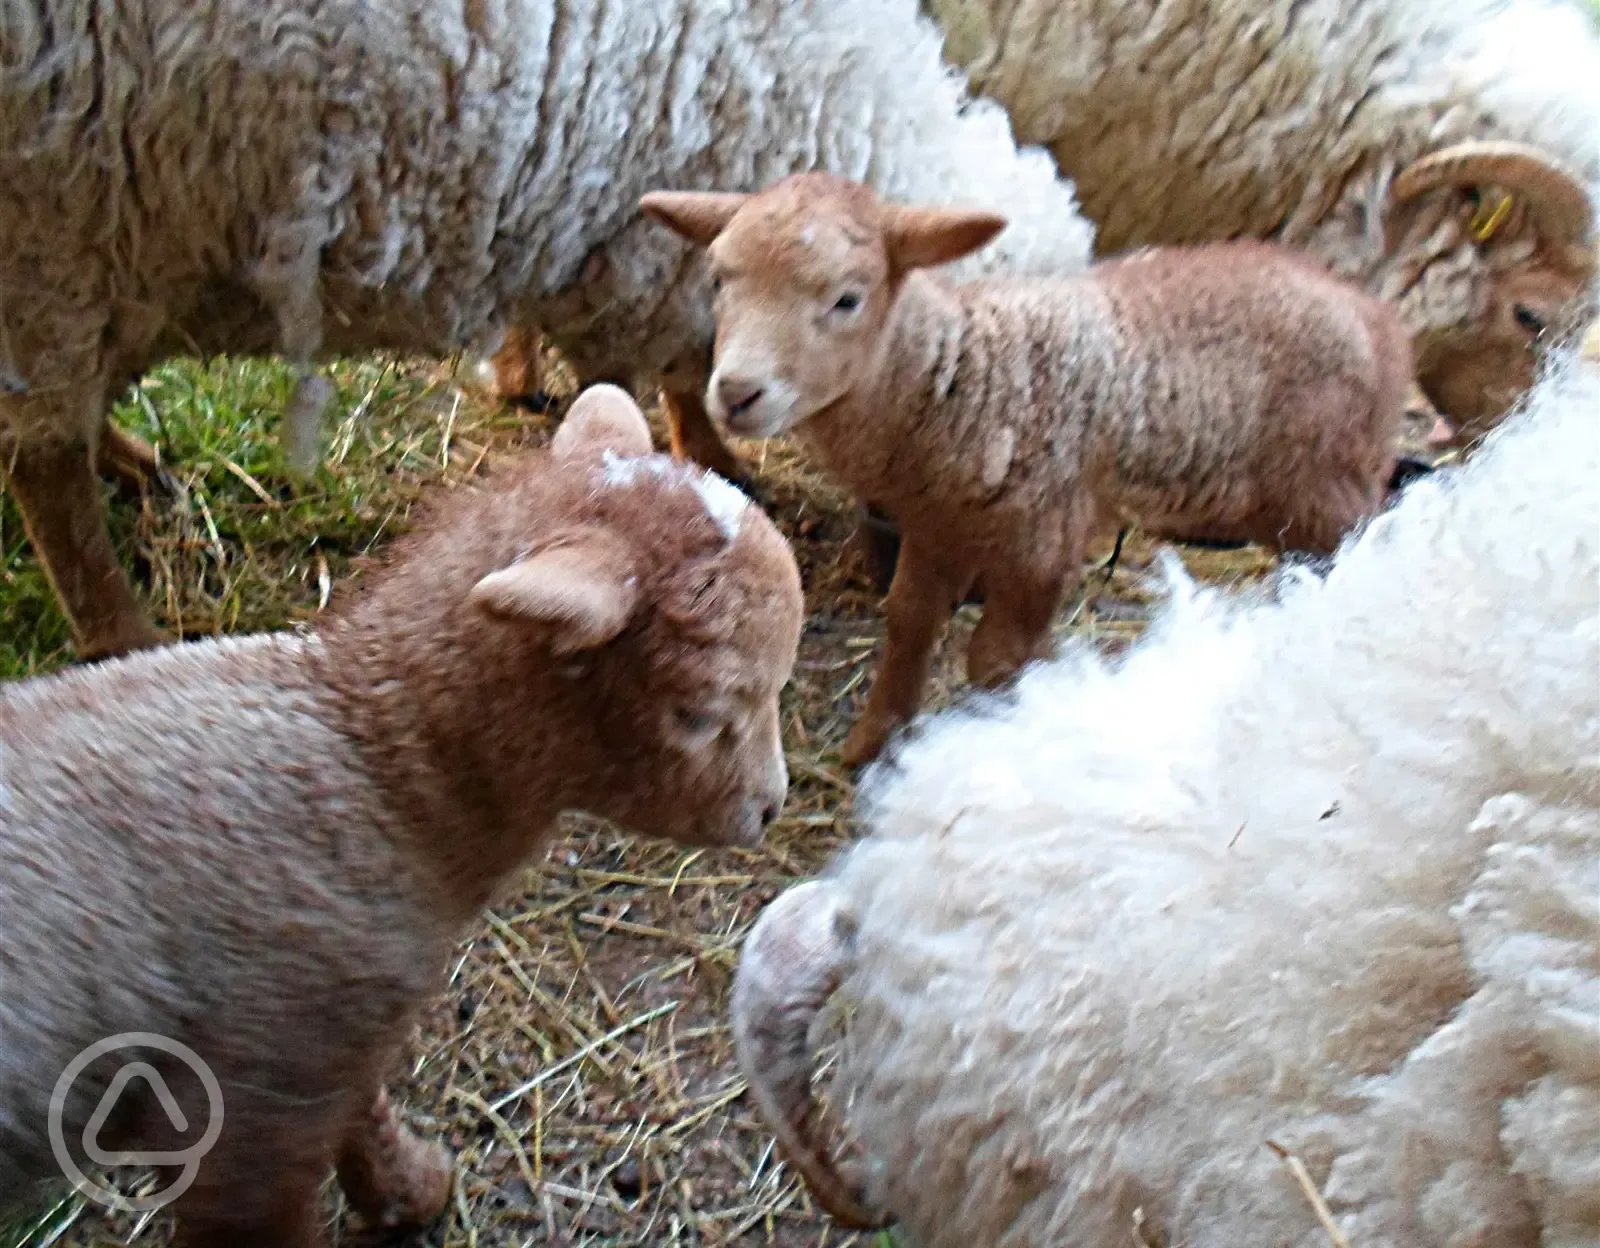 On an April or May visit you can help with the new lambs!